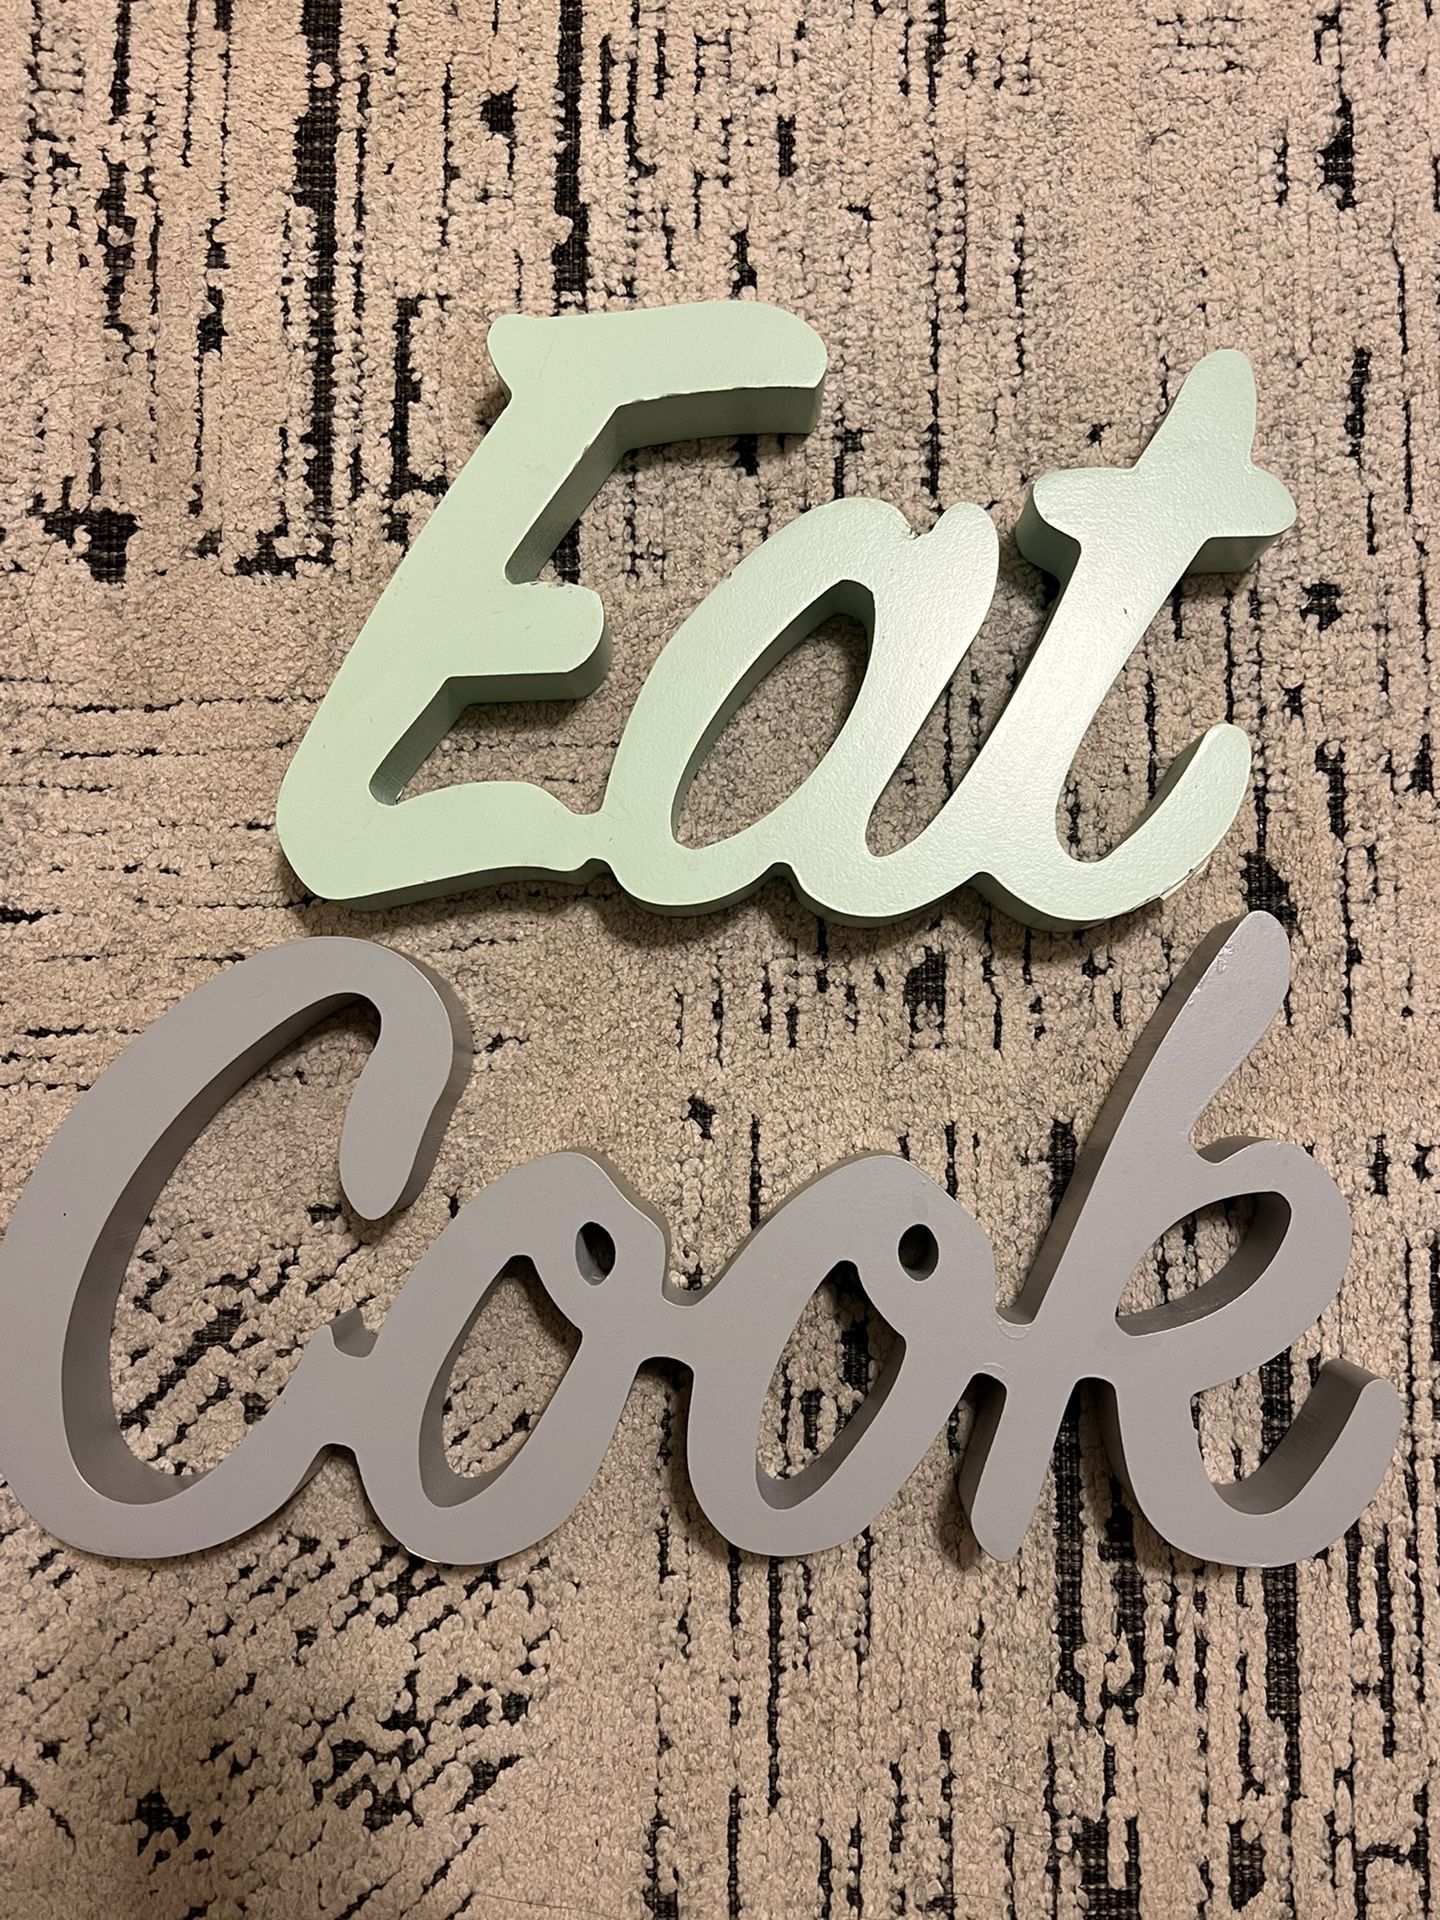 Eat & Cook Wooden Signs- Home Decor